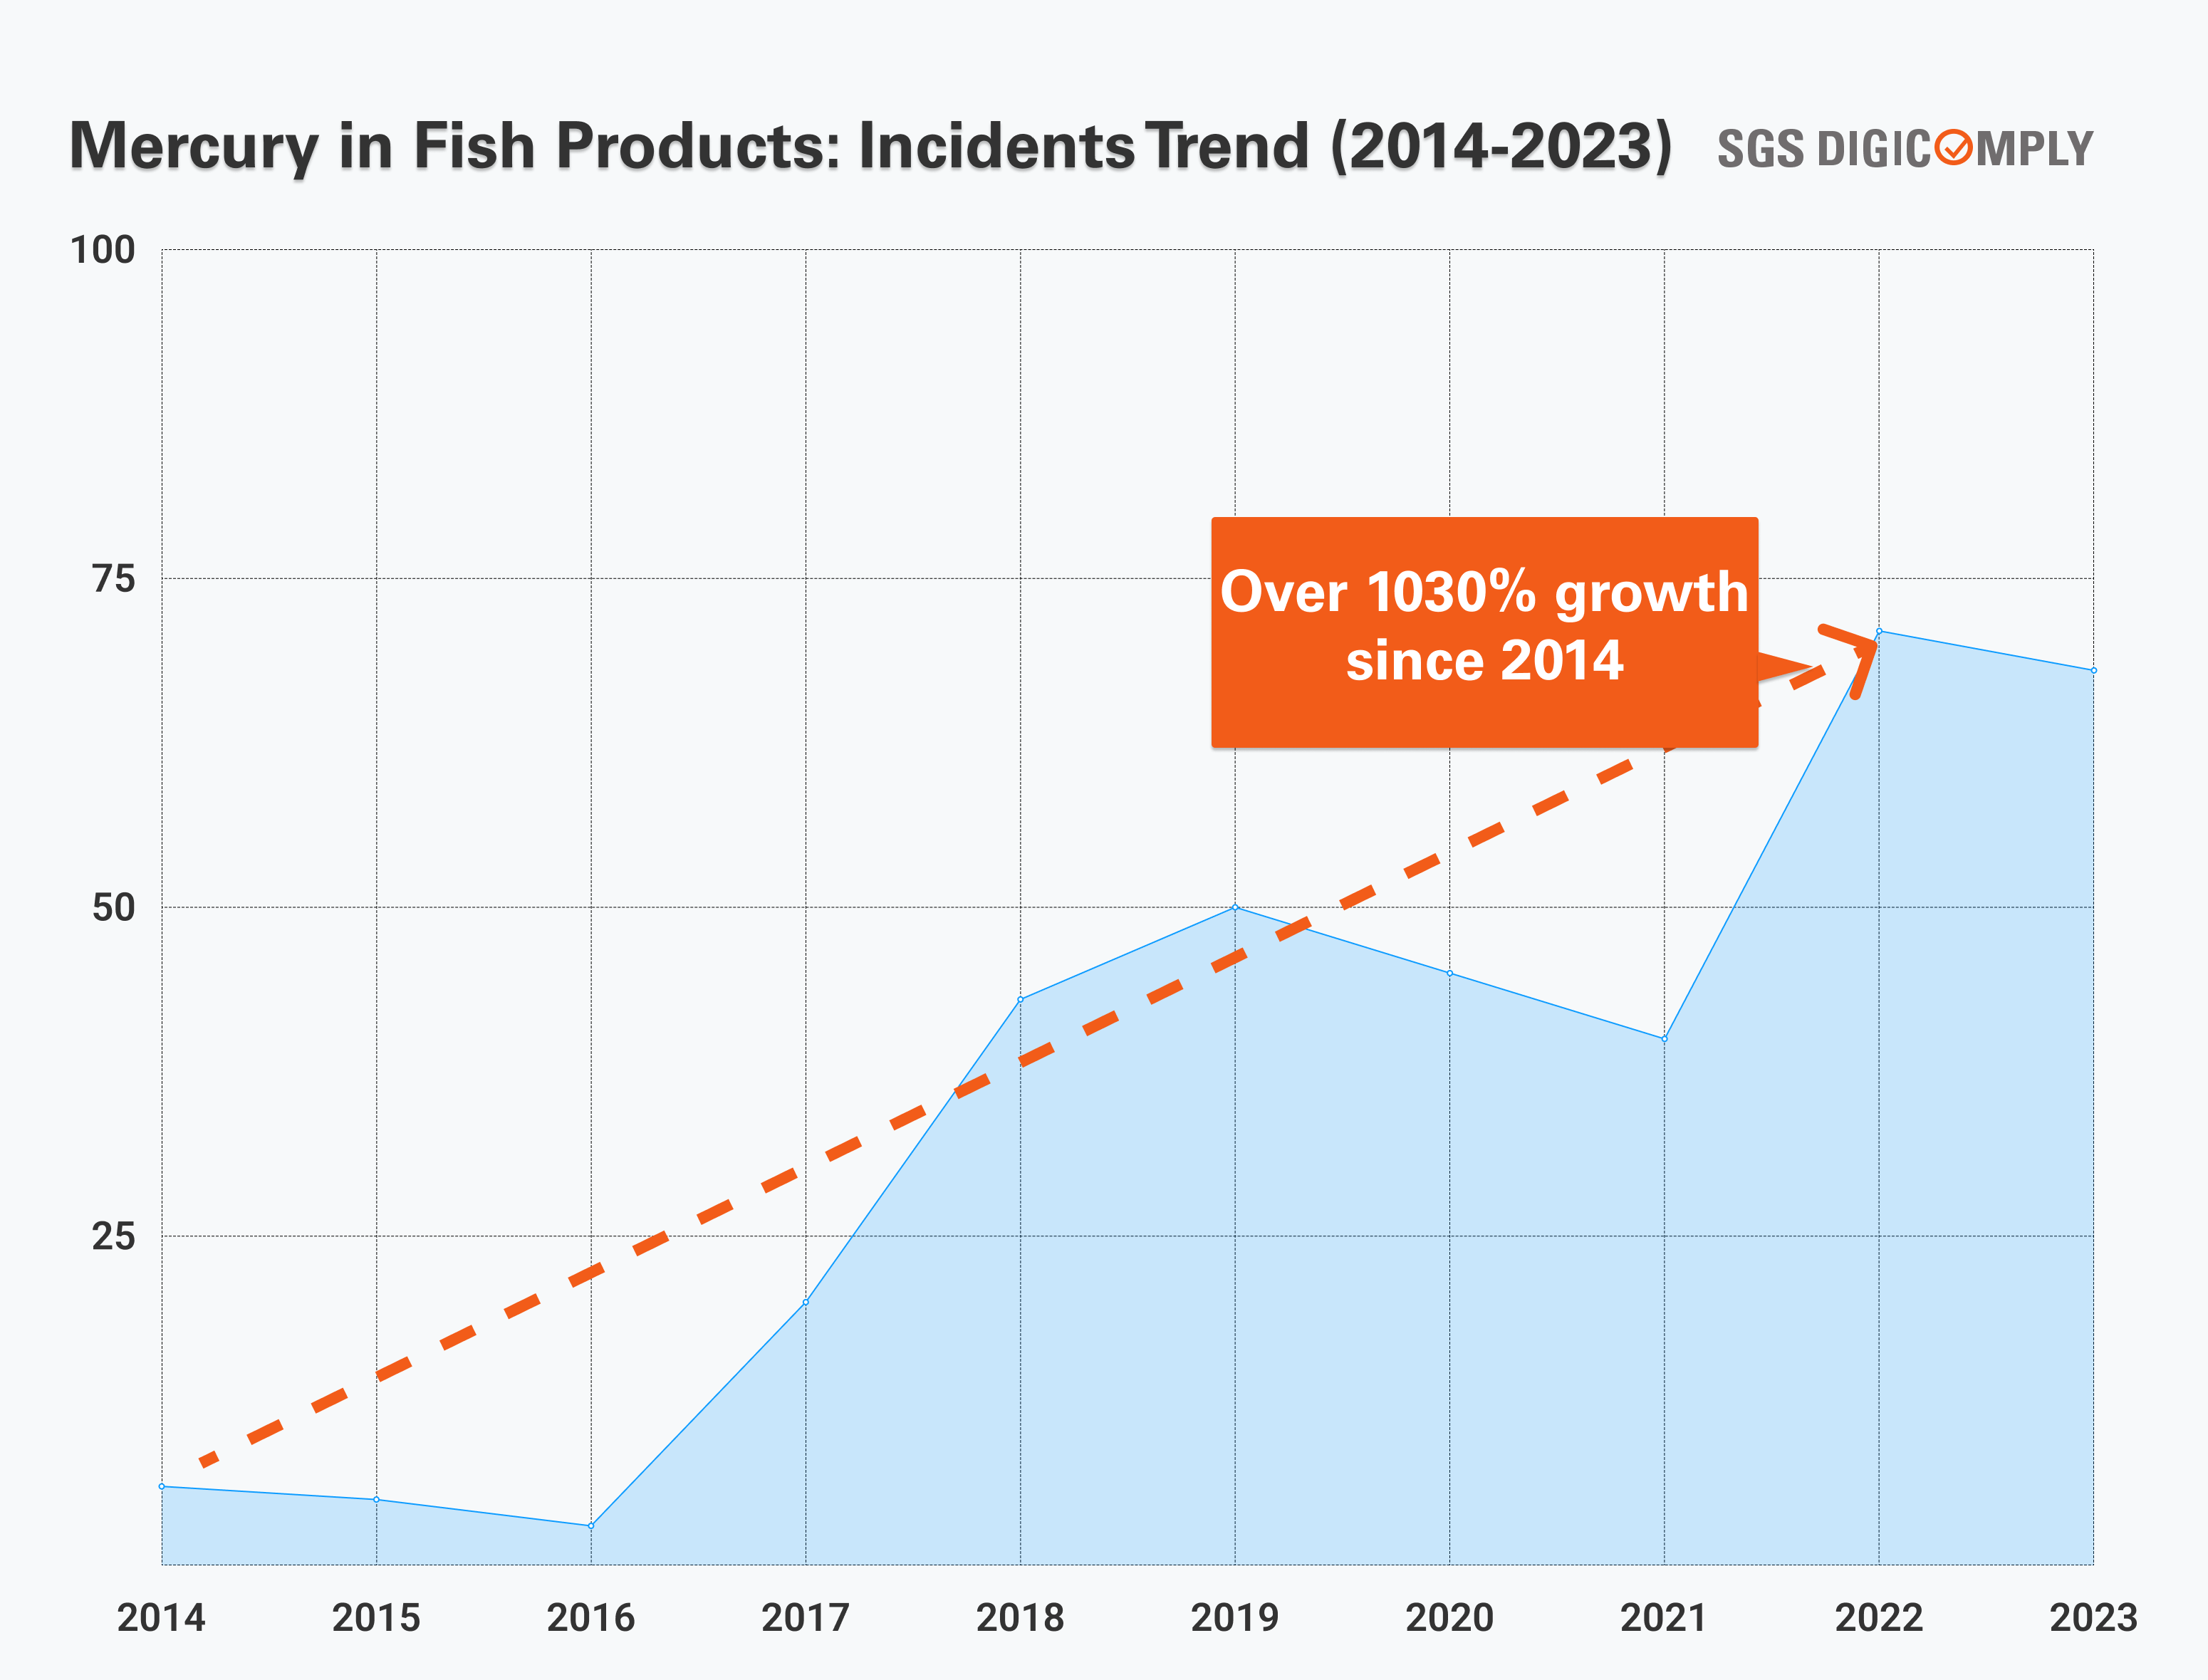 Mercury in Fish Products Incidents Trend 2014-2023